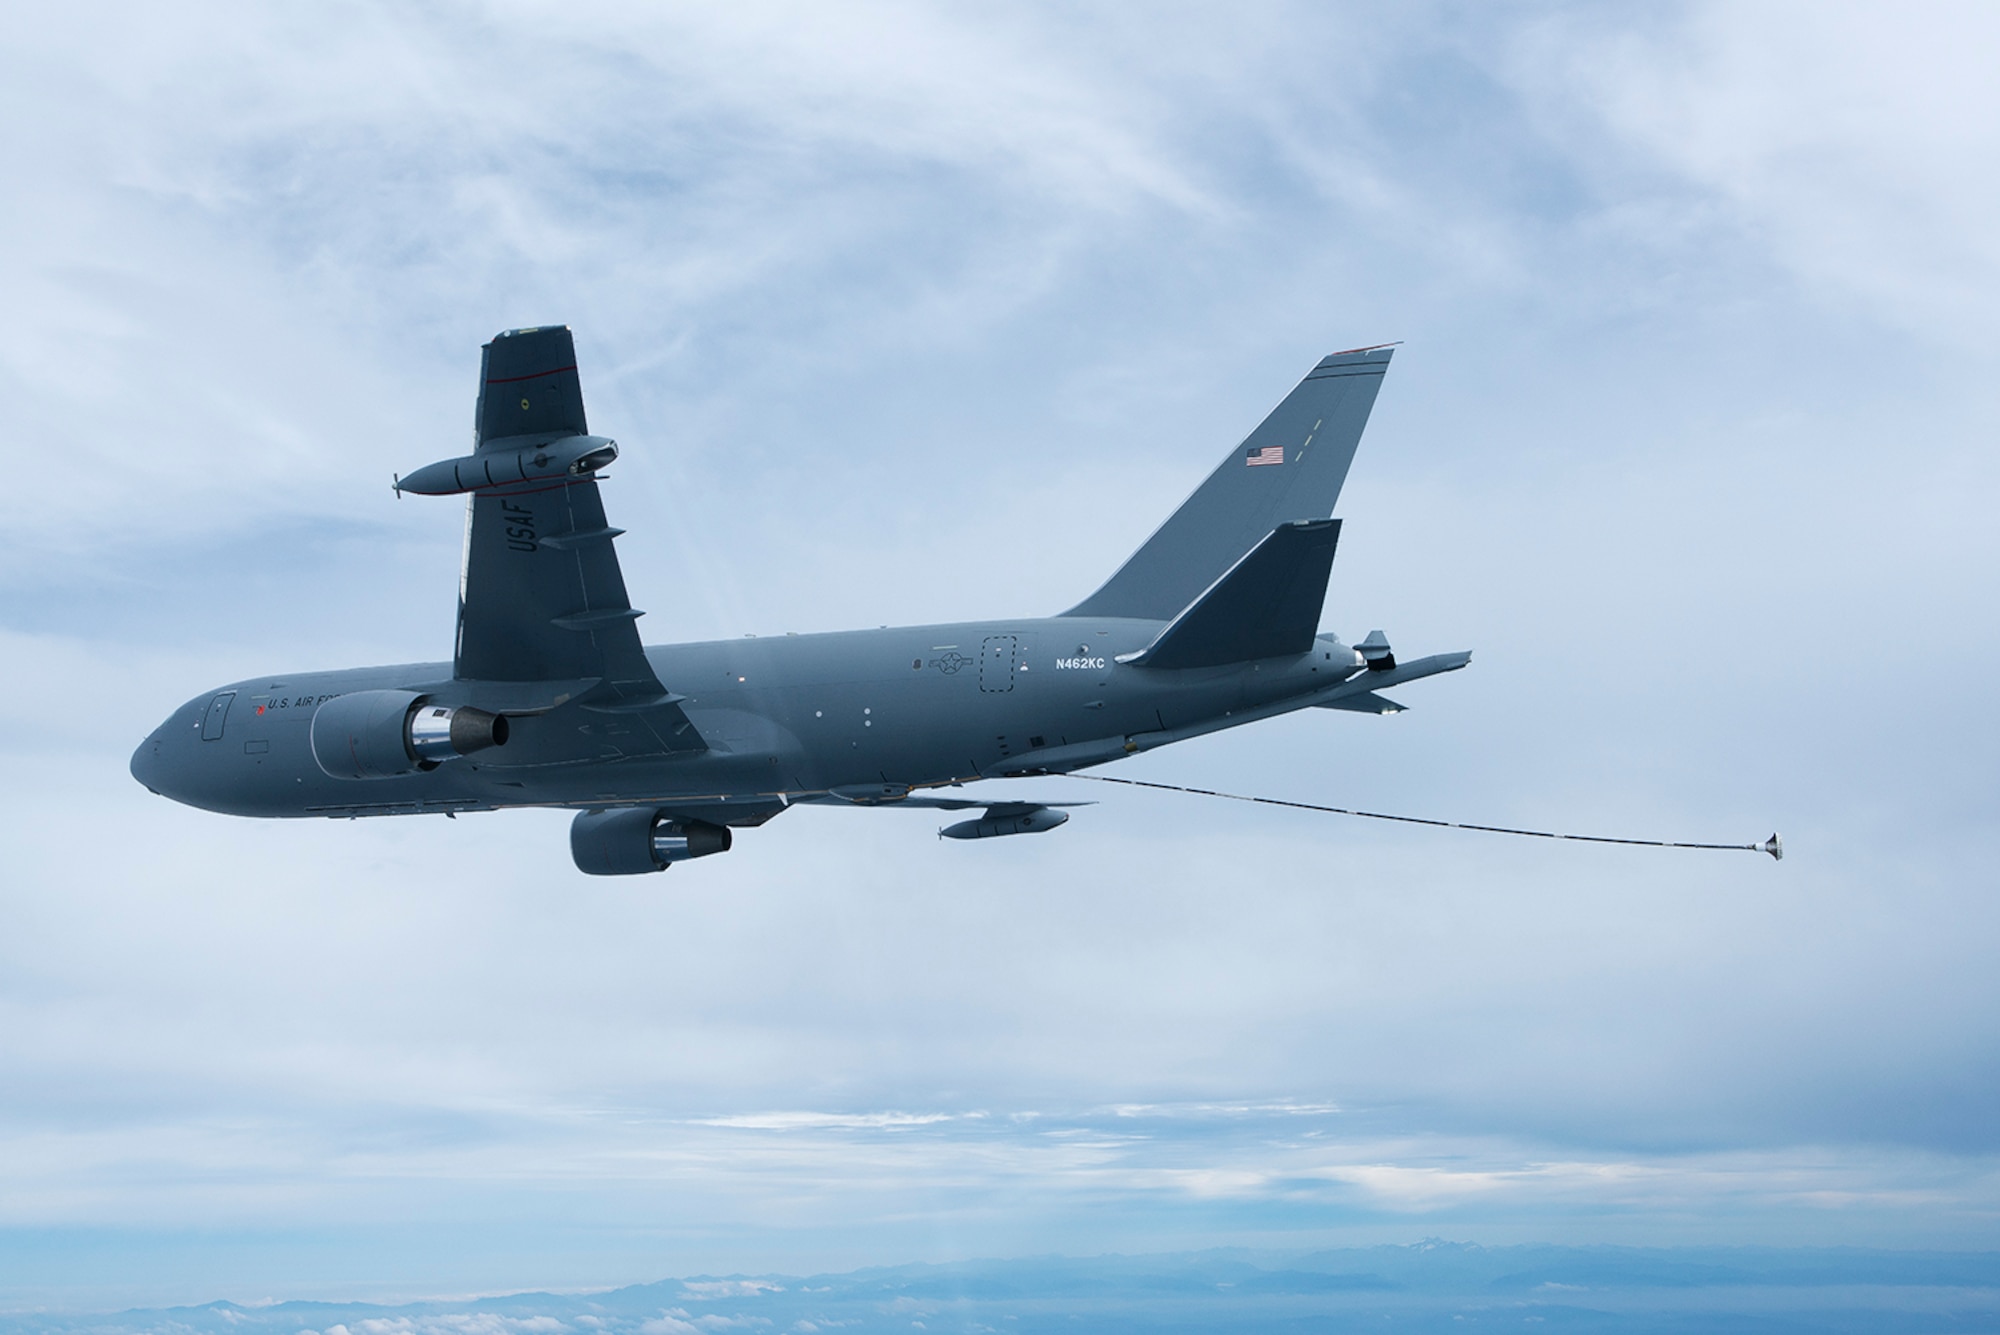 The KC-46A Pegasus deploys the Centerline Drogue System located on the belly of the fuselage on Oct. 8, 2015. The drogue system is used to refuel probe receiver aircraft. (Boeing photo/John D. Parker)